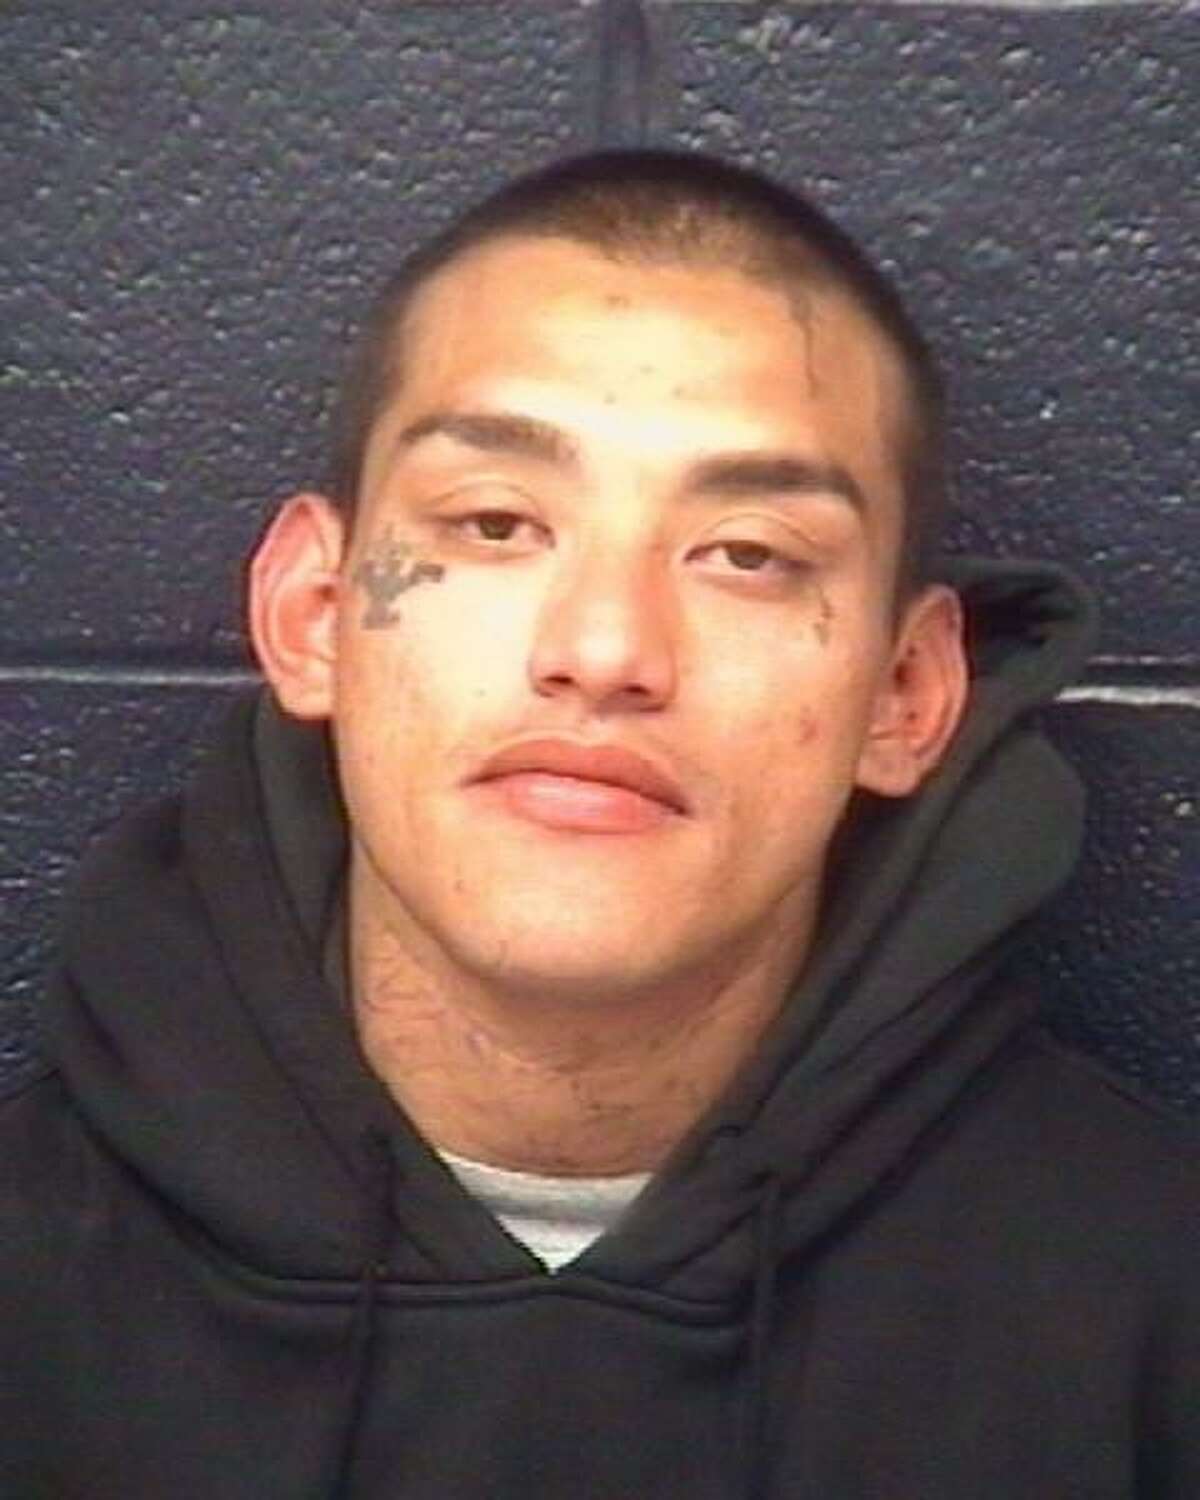 Julian Cruz, 29, is wanted on charges of burglary and theft.